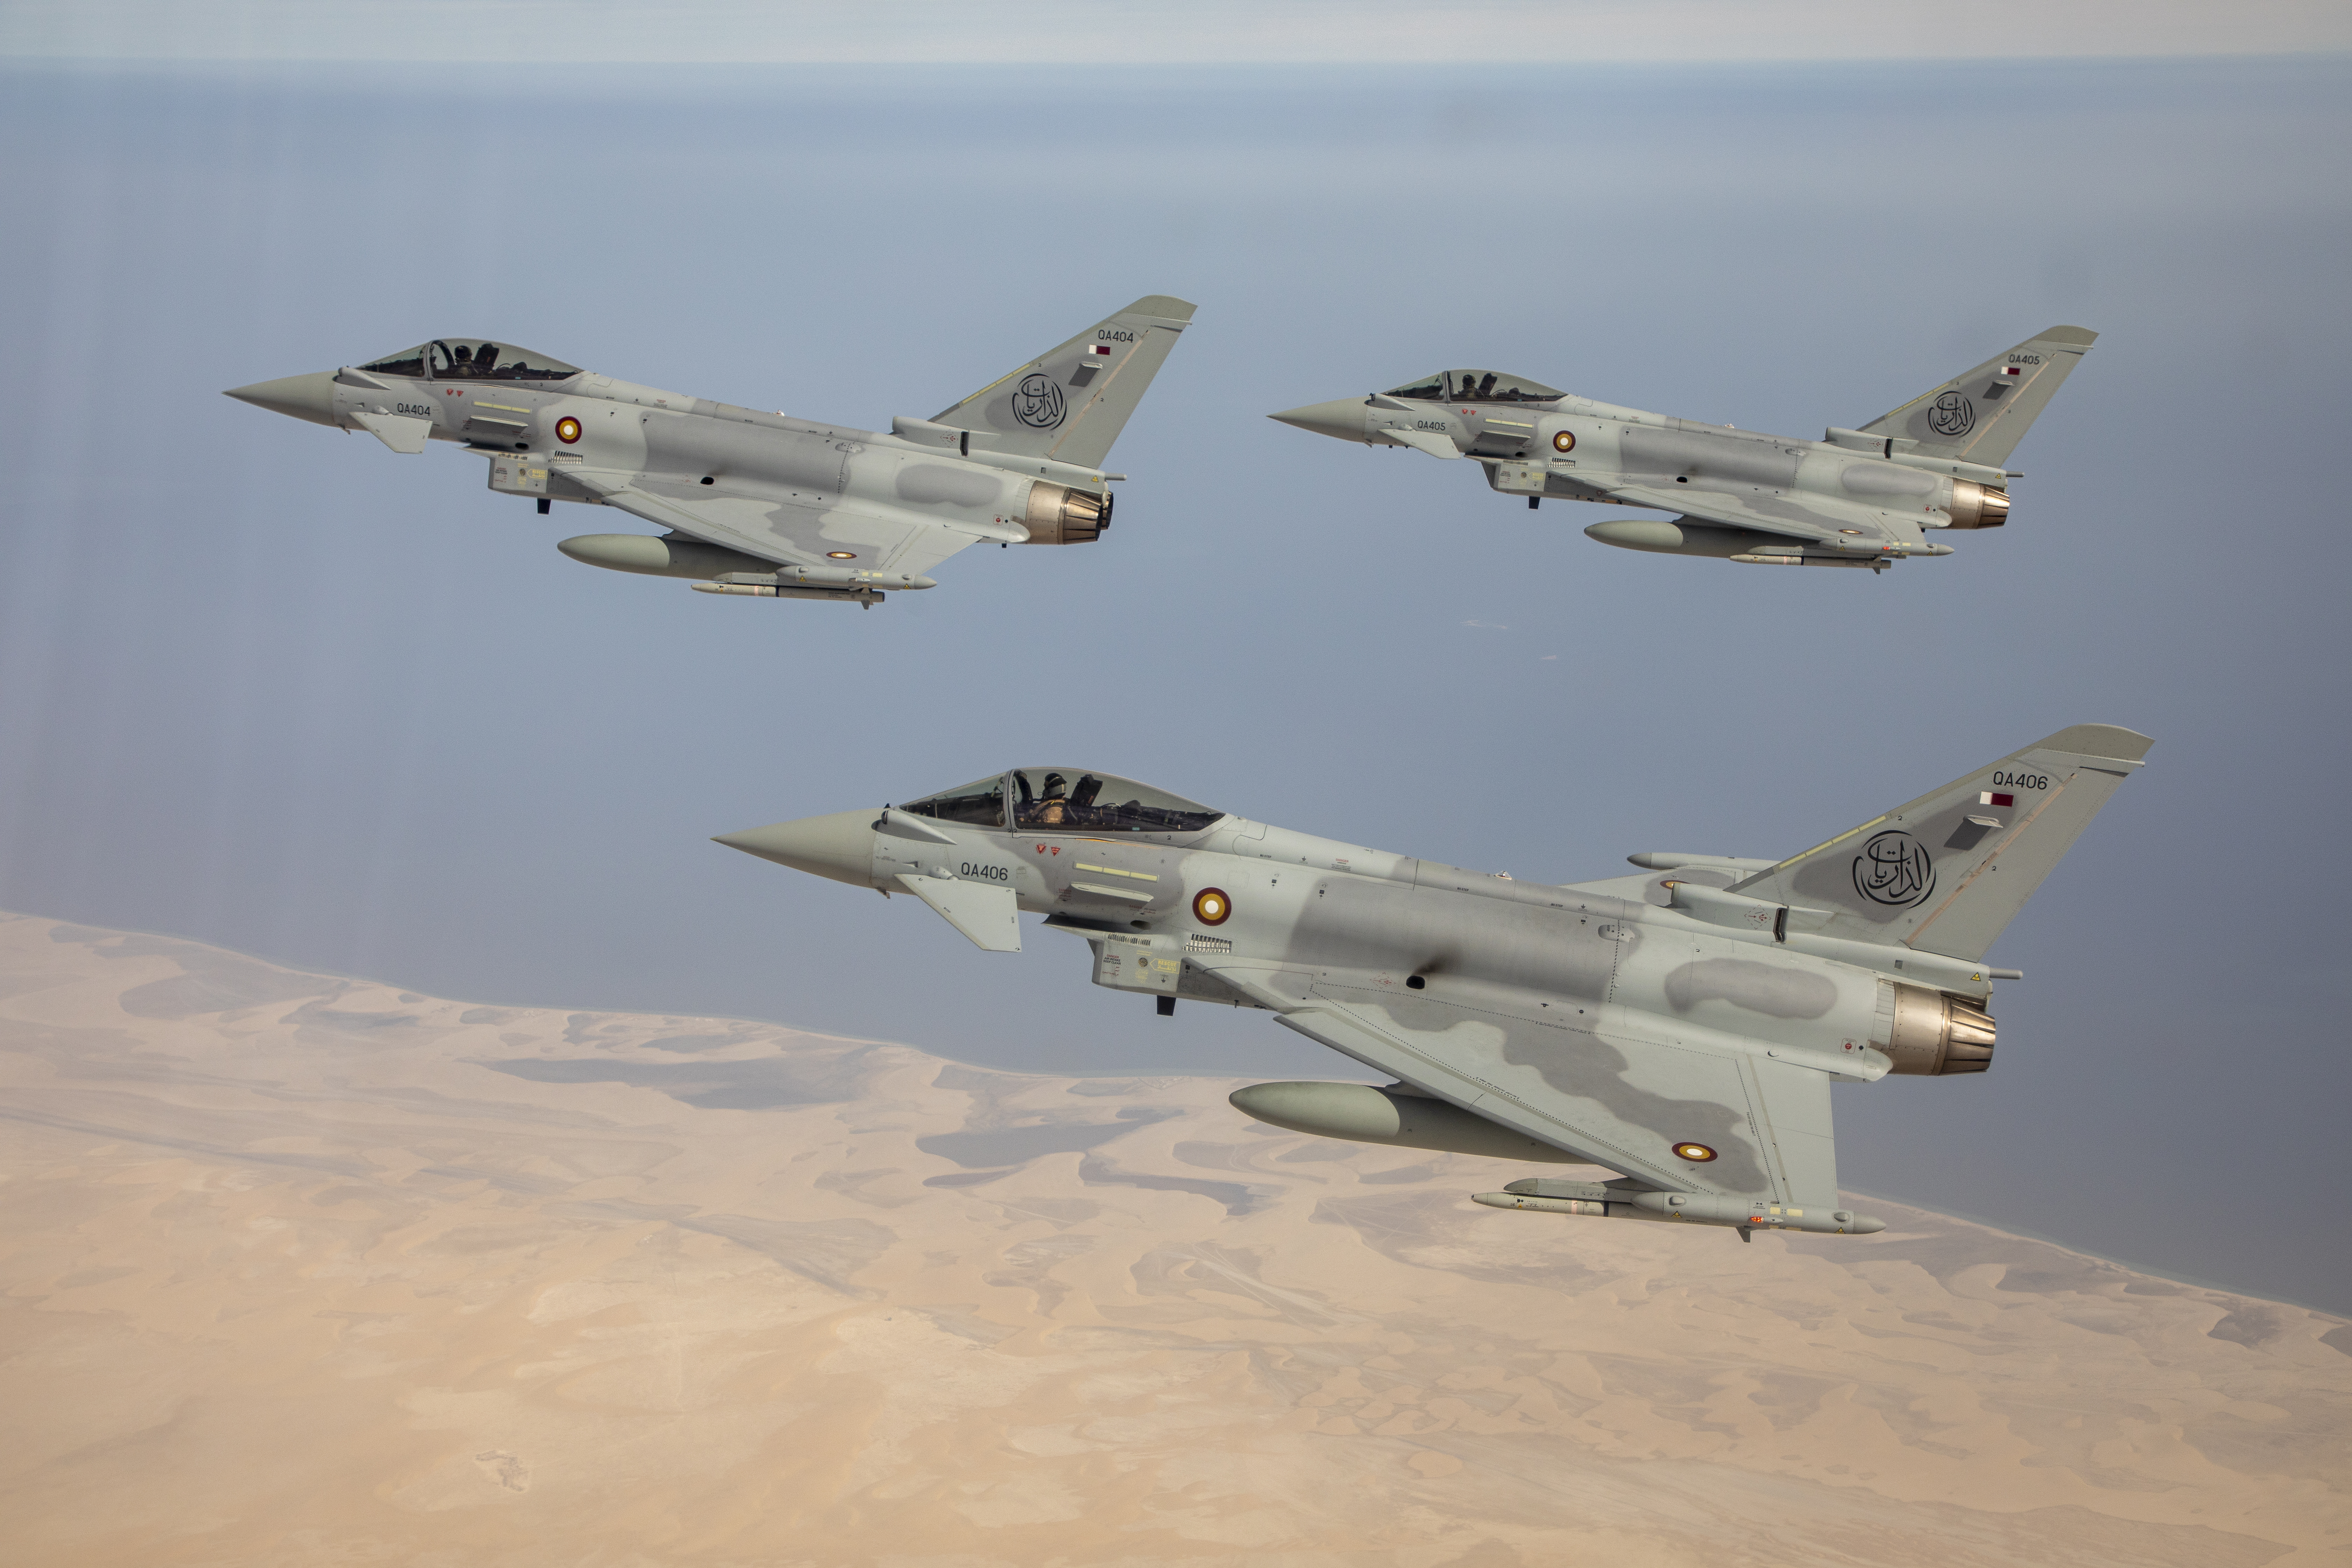 Image shows Typhoons flying in formation. 